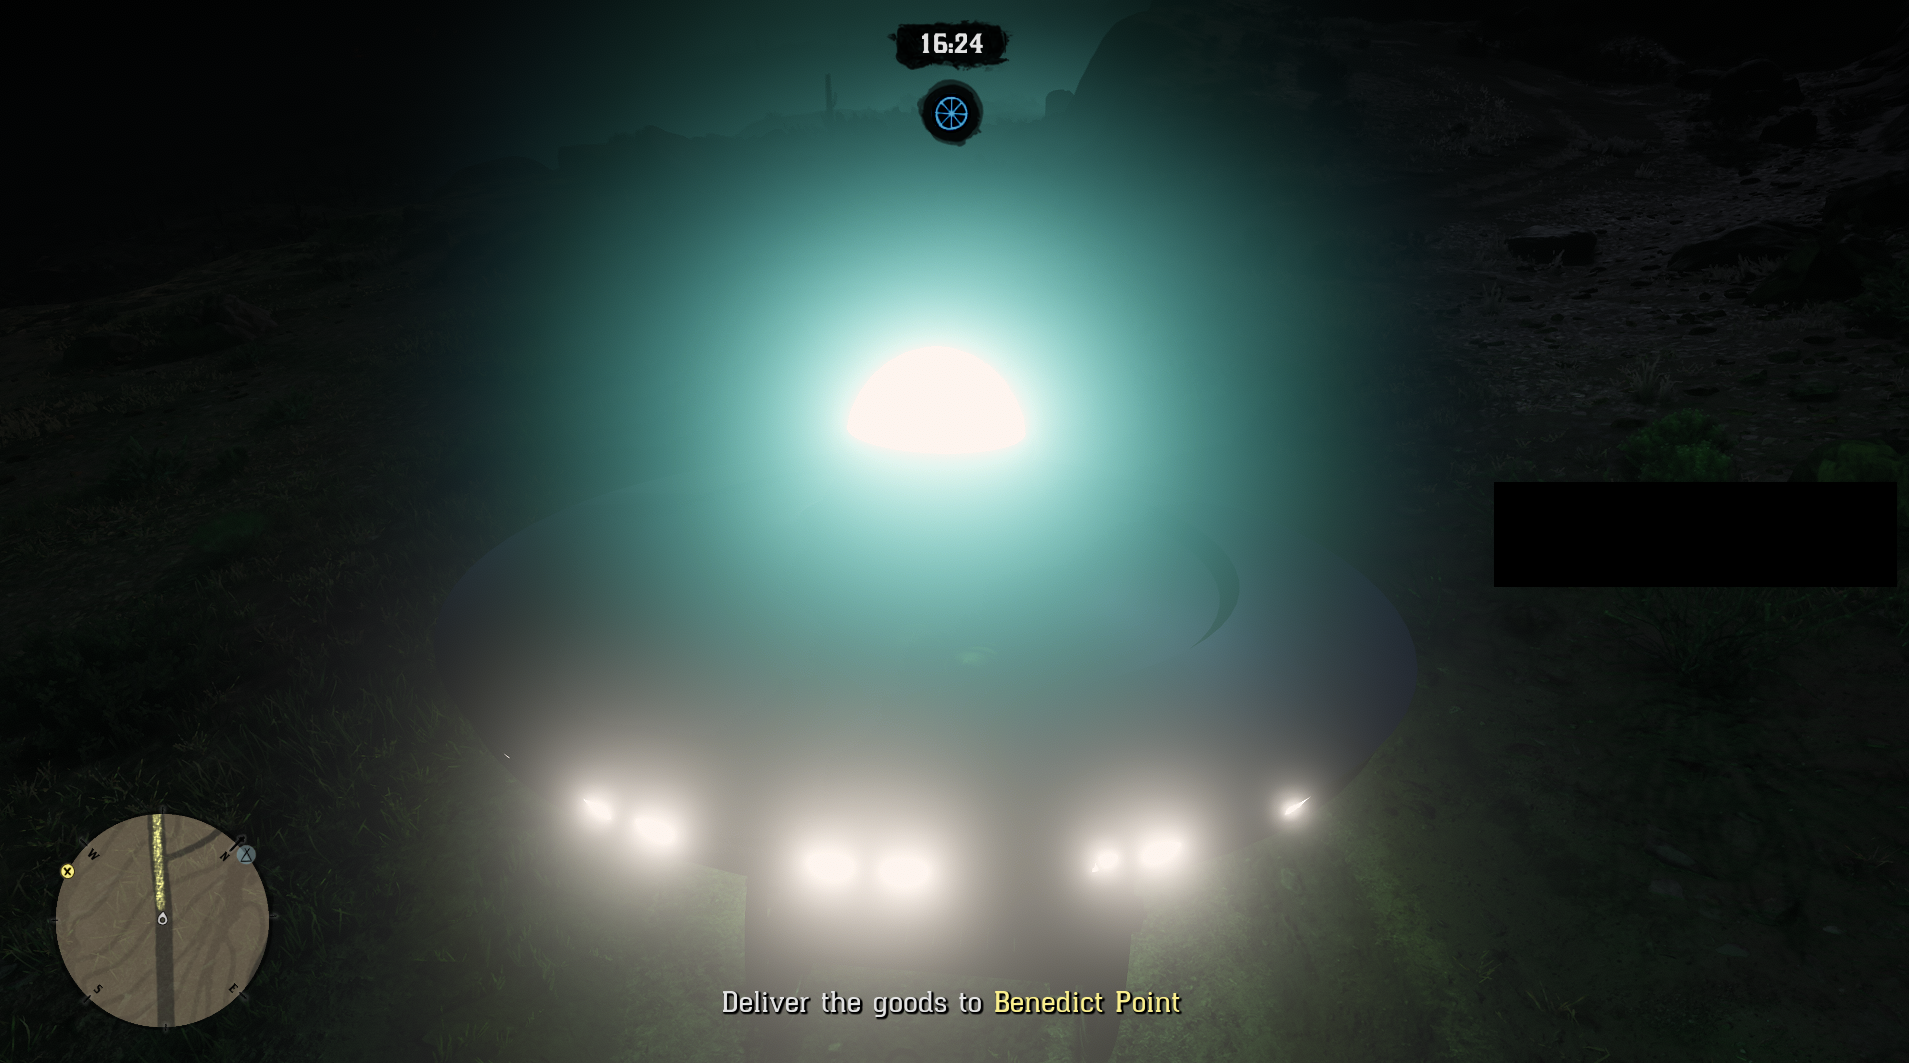 Red Dead Online - at night, a UFO fills up the screen, it's a large turquoise light with several smaller white lights along the base, the rest is hard to see